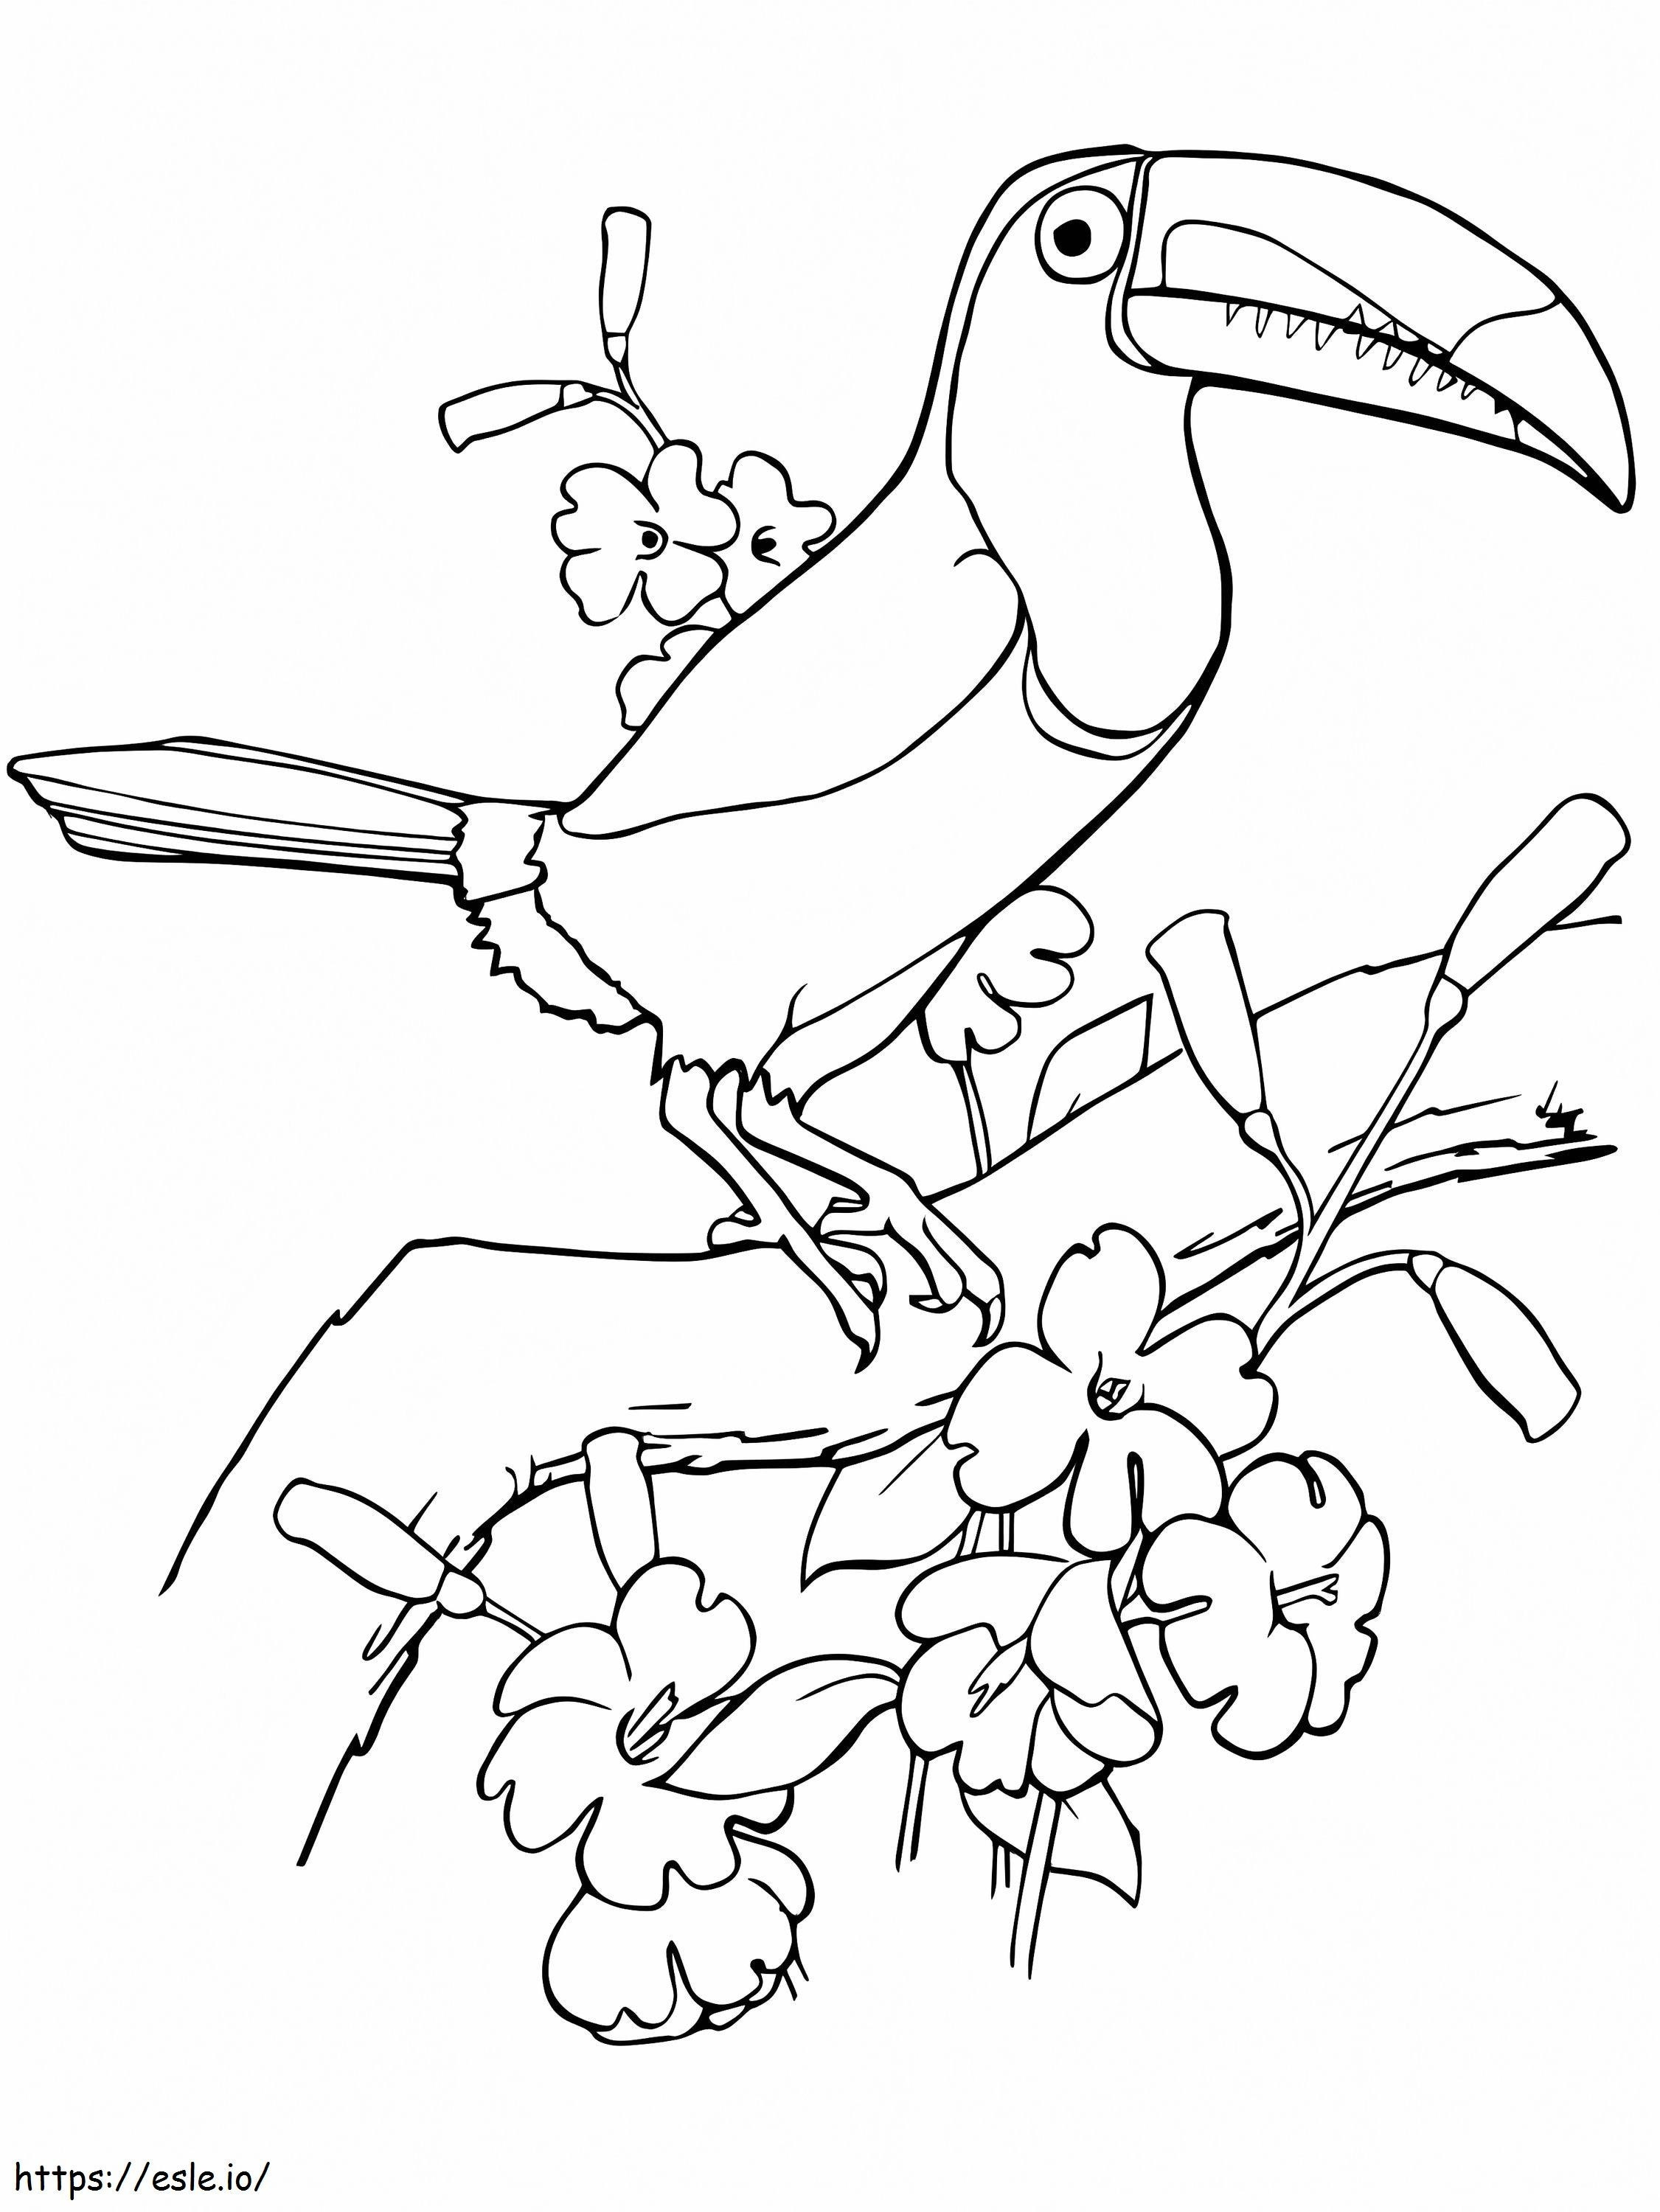 Keel Billed Toucan Bird coloring page